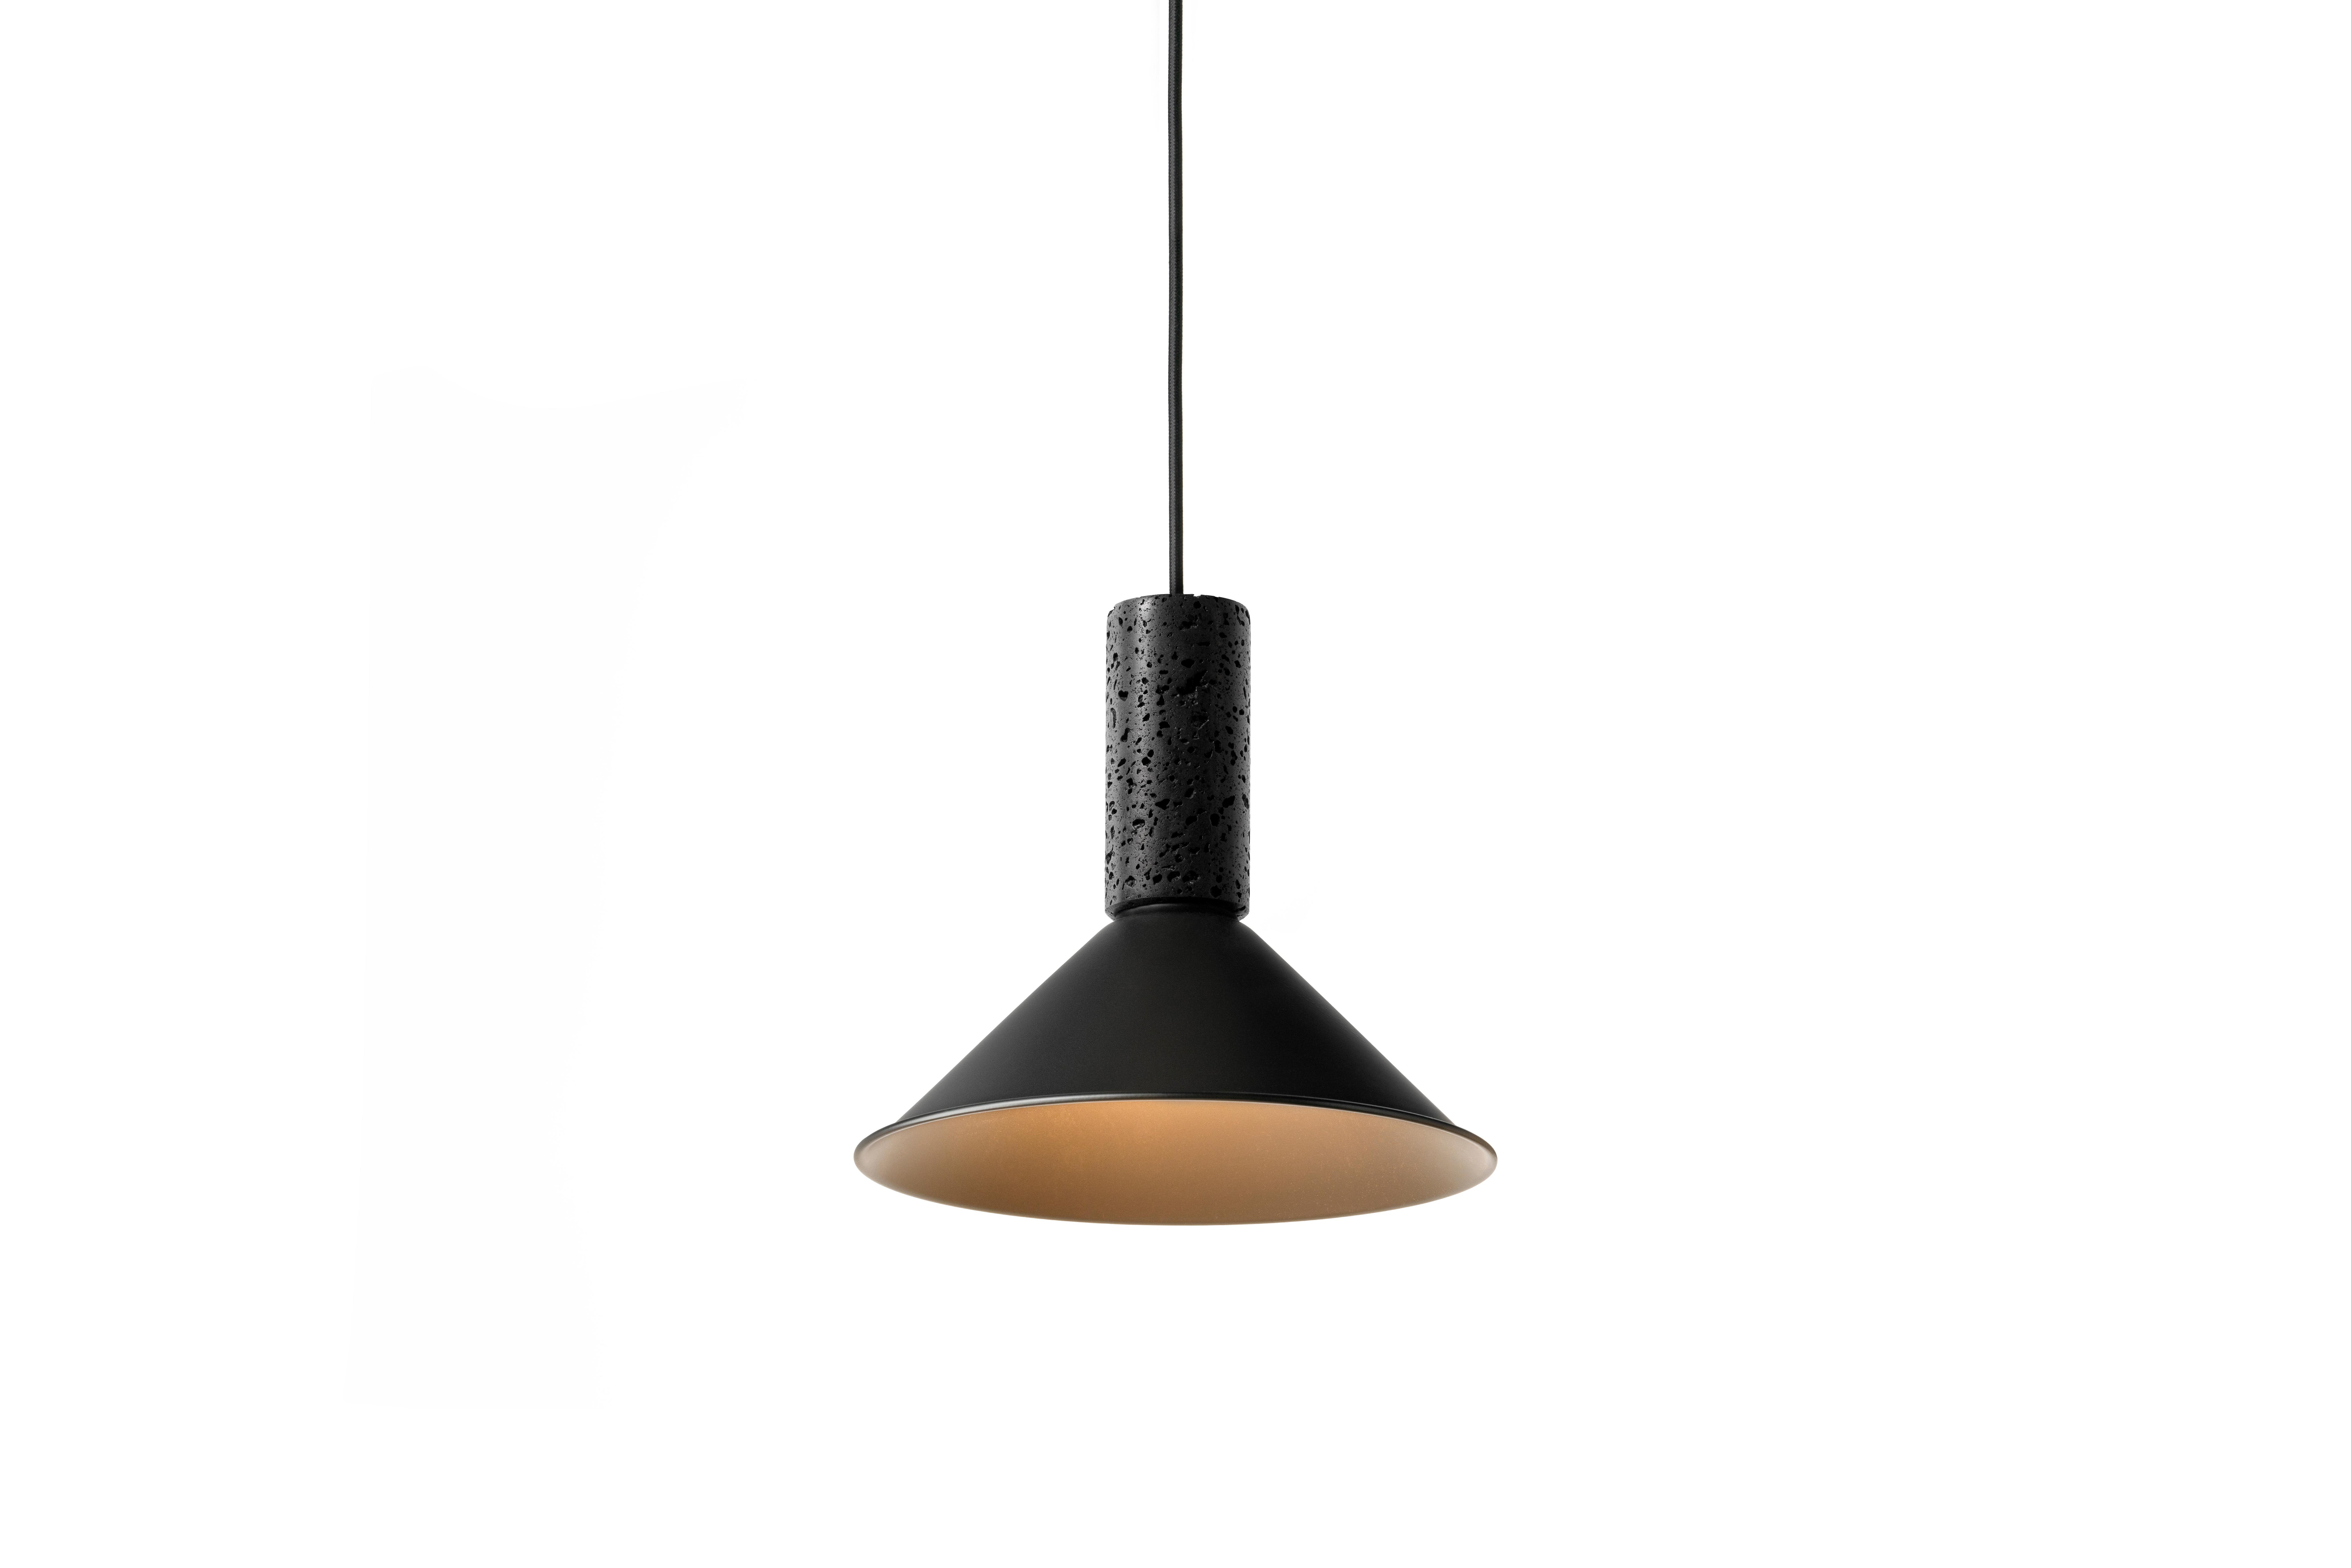 Pendant lamp 'R' by Buzao x Bentu design.
Black lava stone and black aluminum

Measures: 24 cm high, 26 cm diameter
Wire: 2 meters black (adjustable) 
Lamp type: E27 LED 3W 100-240V 80Ra 200LM 2700K - Comptable with US electric system.
Ceiling rose: